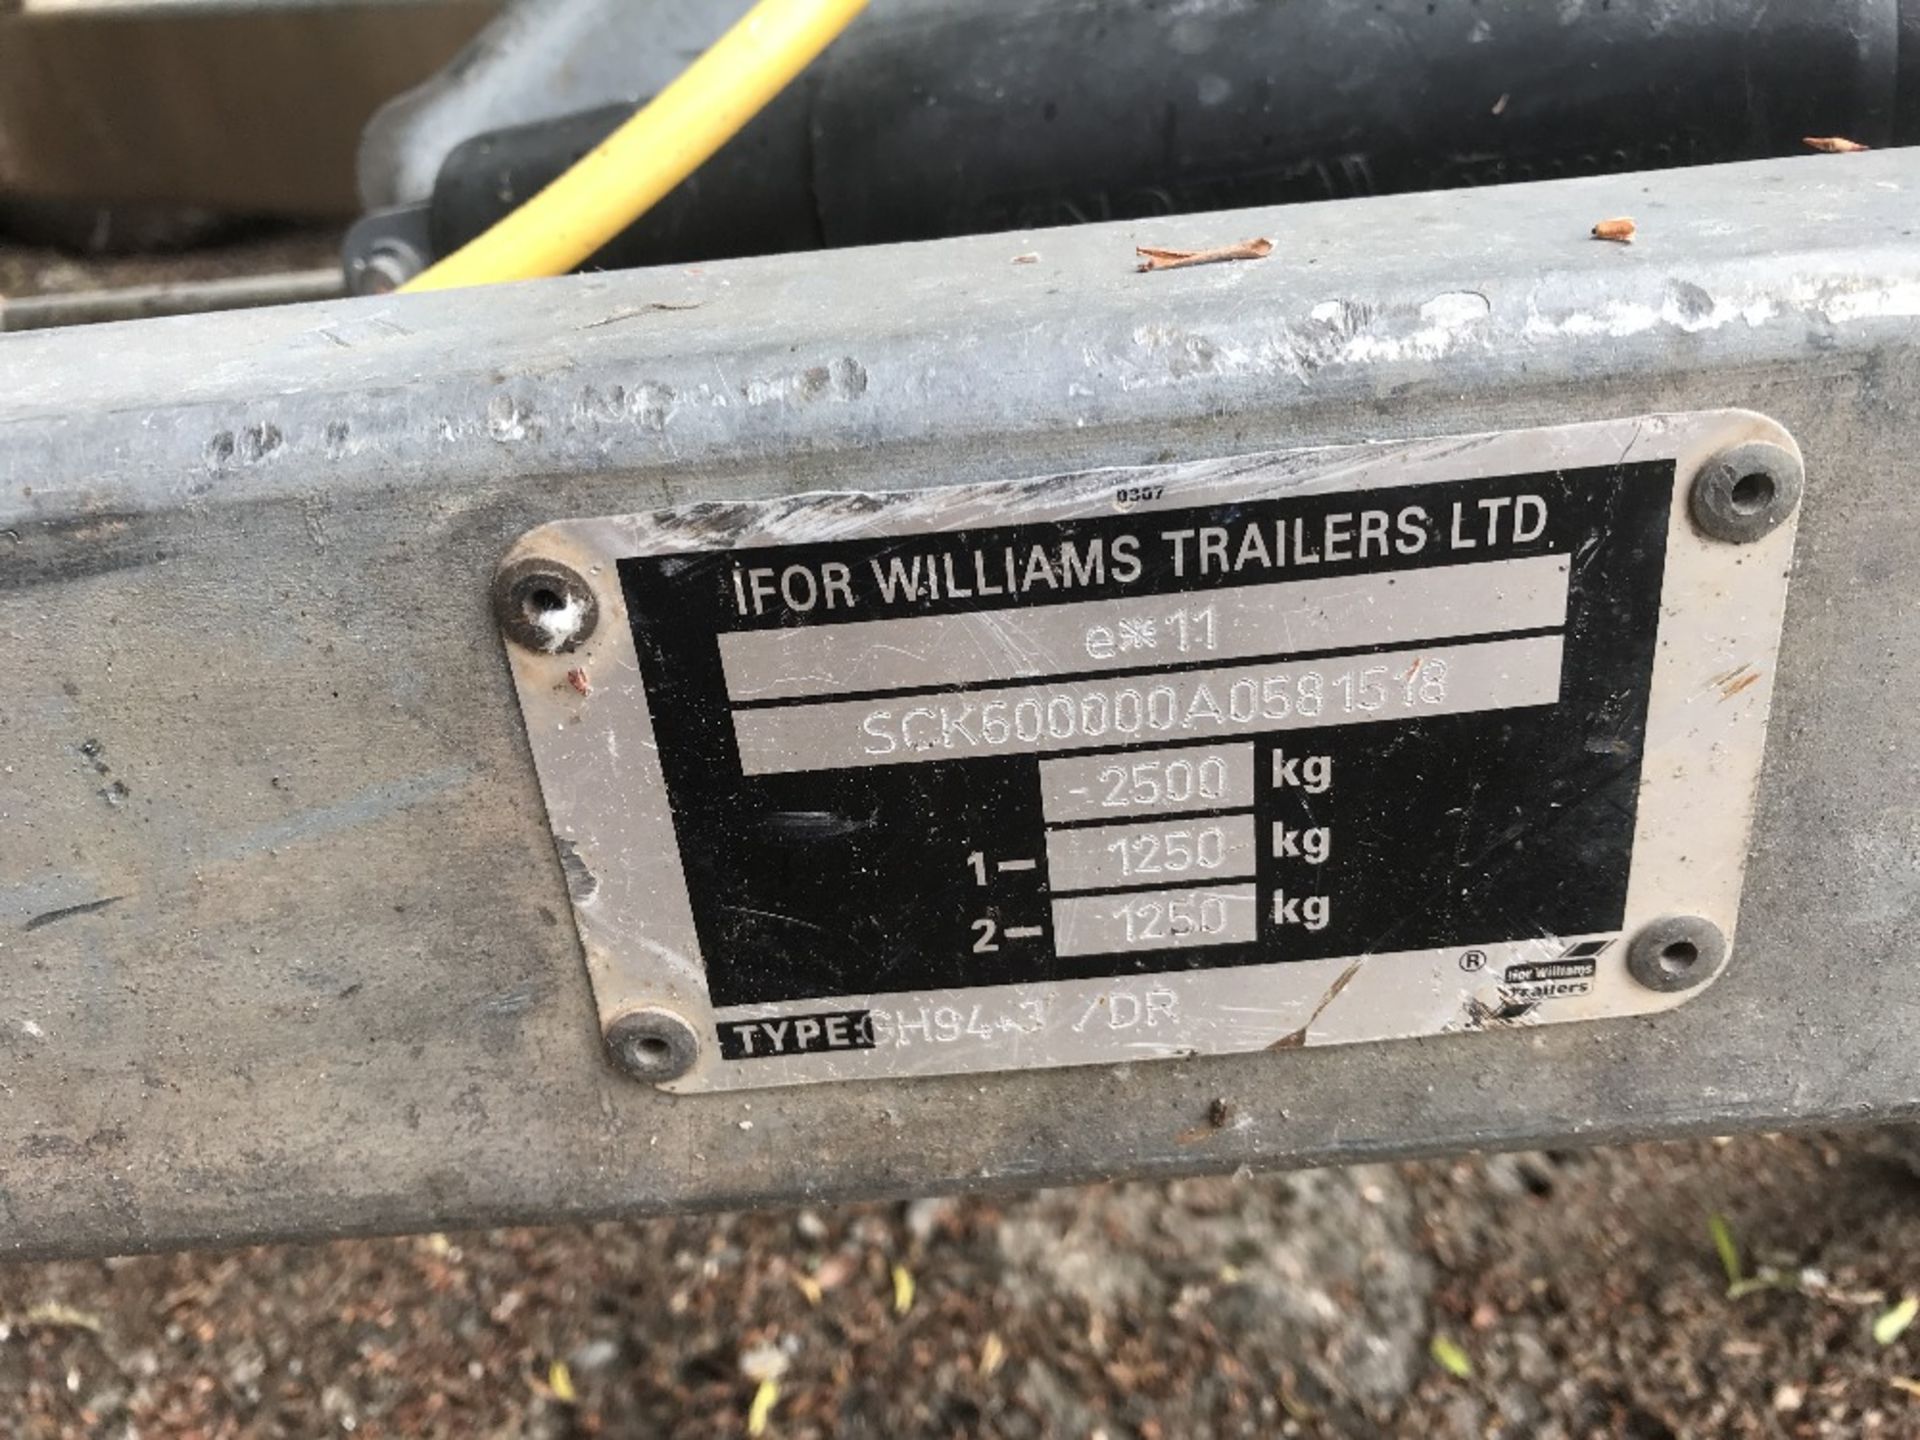 IFOR WILLIAMS GH94-3 TWIN WHEELED MINI DIGGER TRAILER YEAR 2010 SN:SCK600000A0581518 - Image 3 of 3